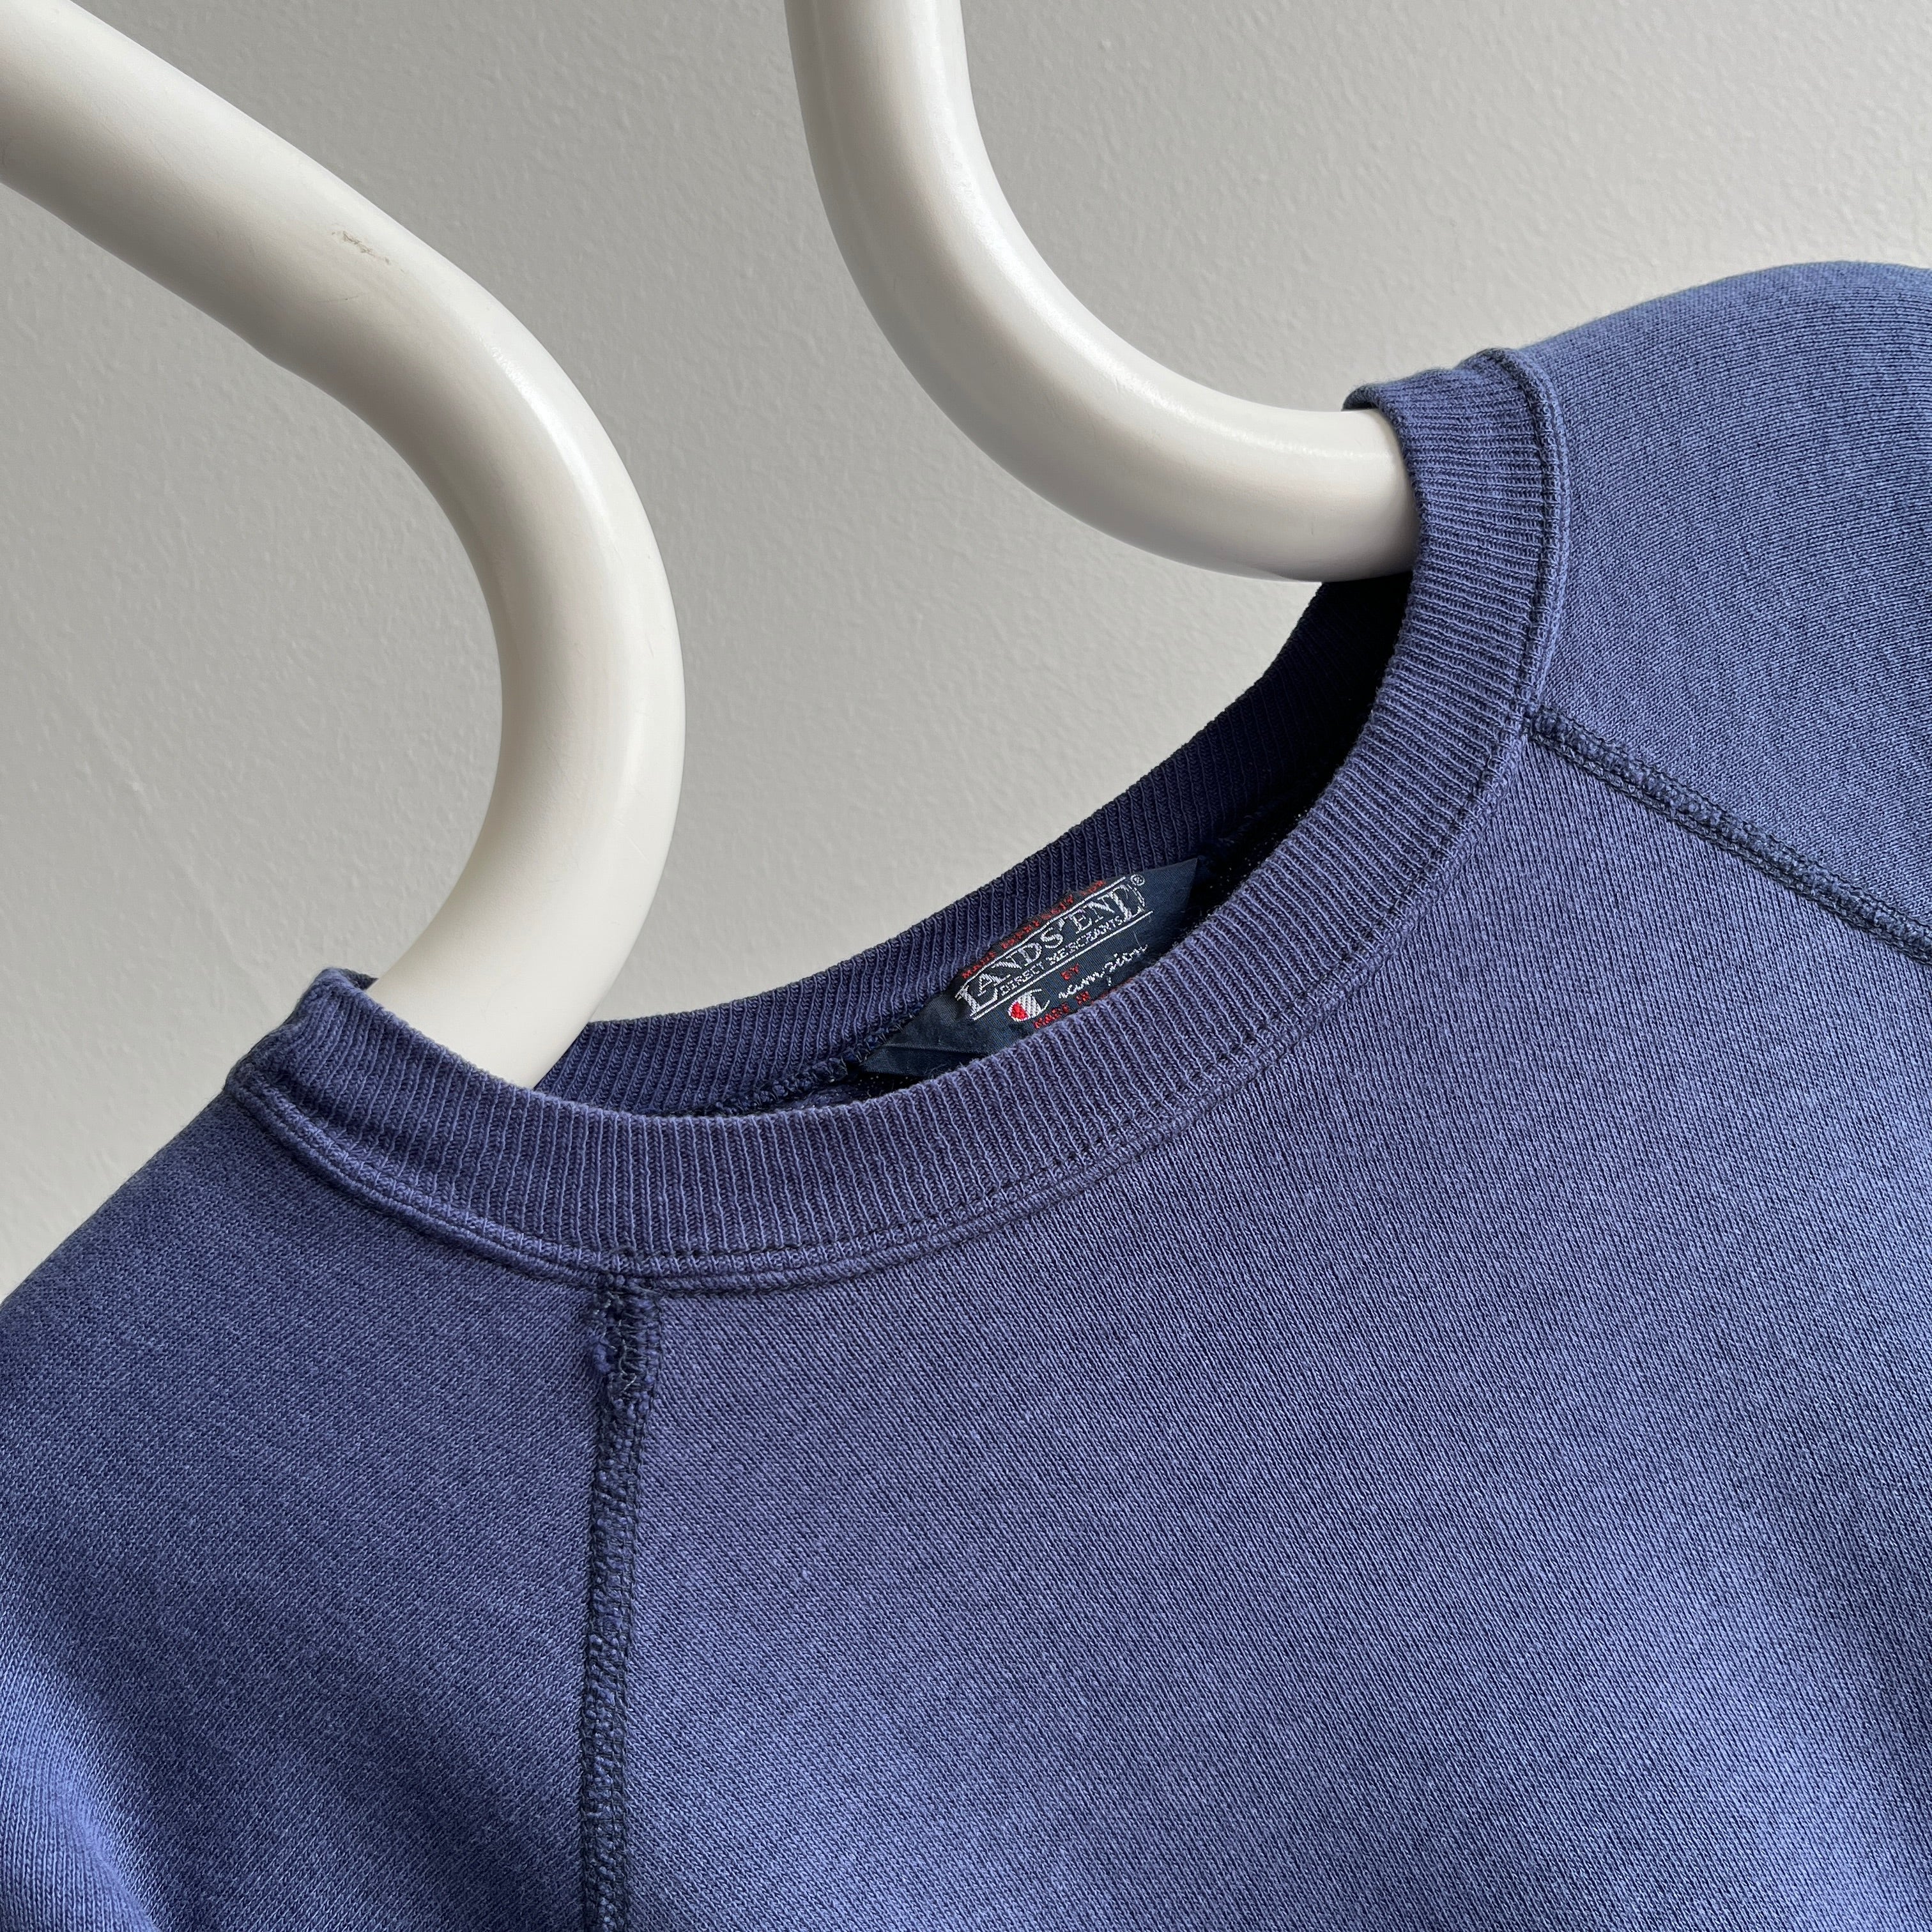 1980s Lands' End x Champion Most Incredible Soft Blank Navy Raglan You Might Ever Own